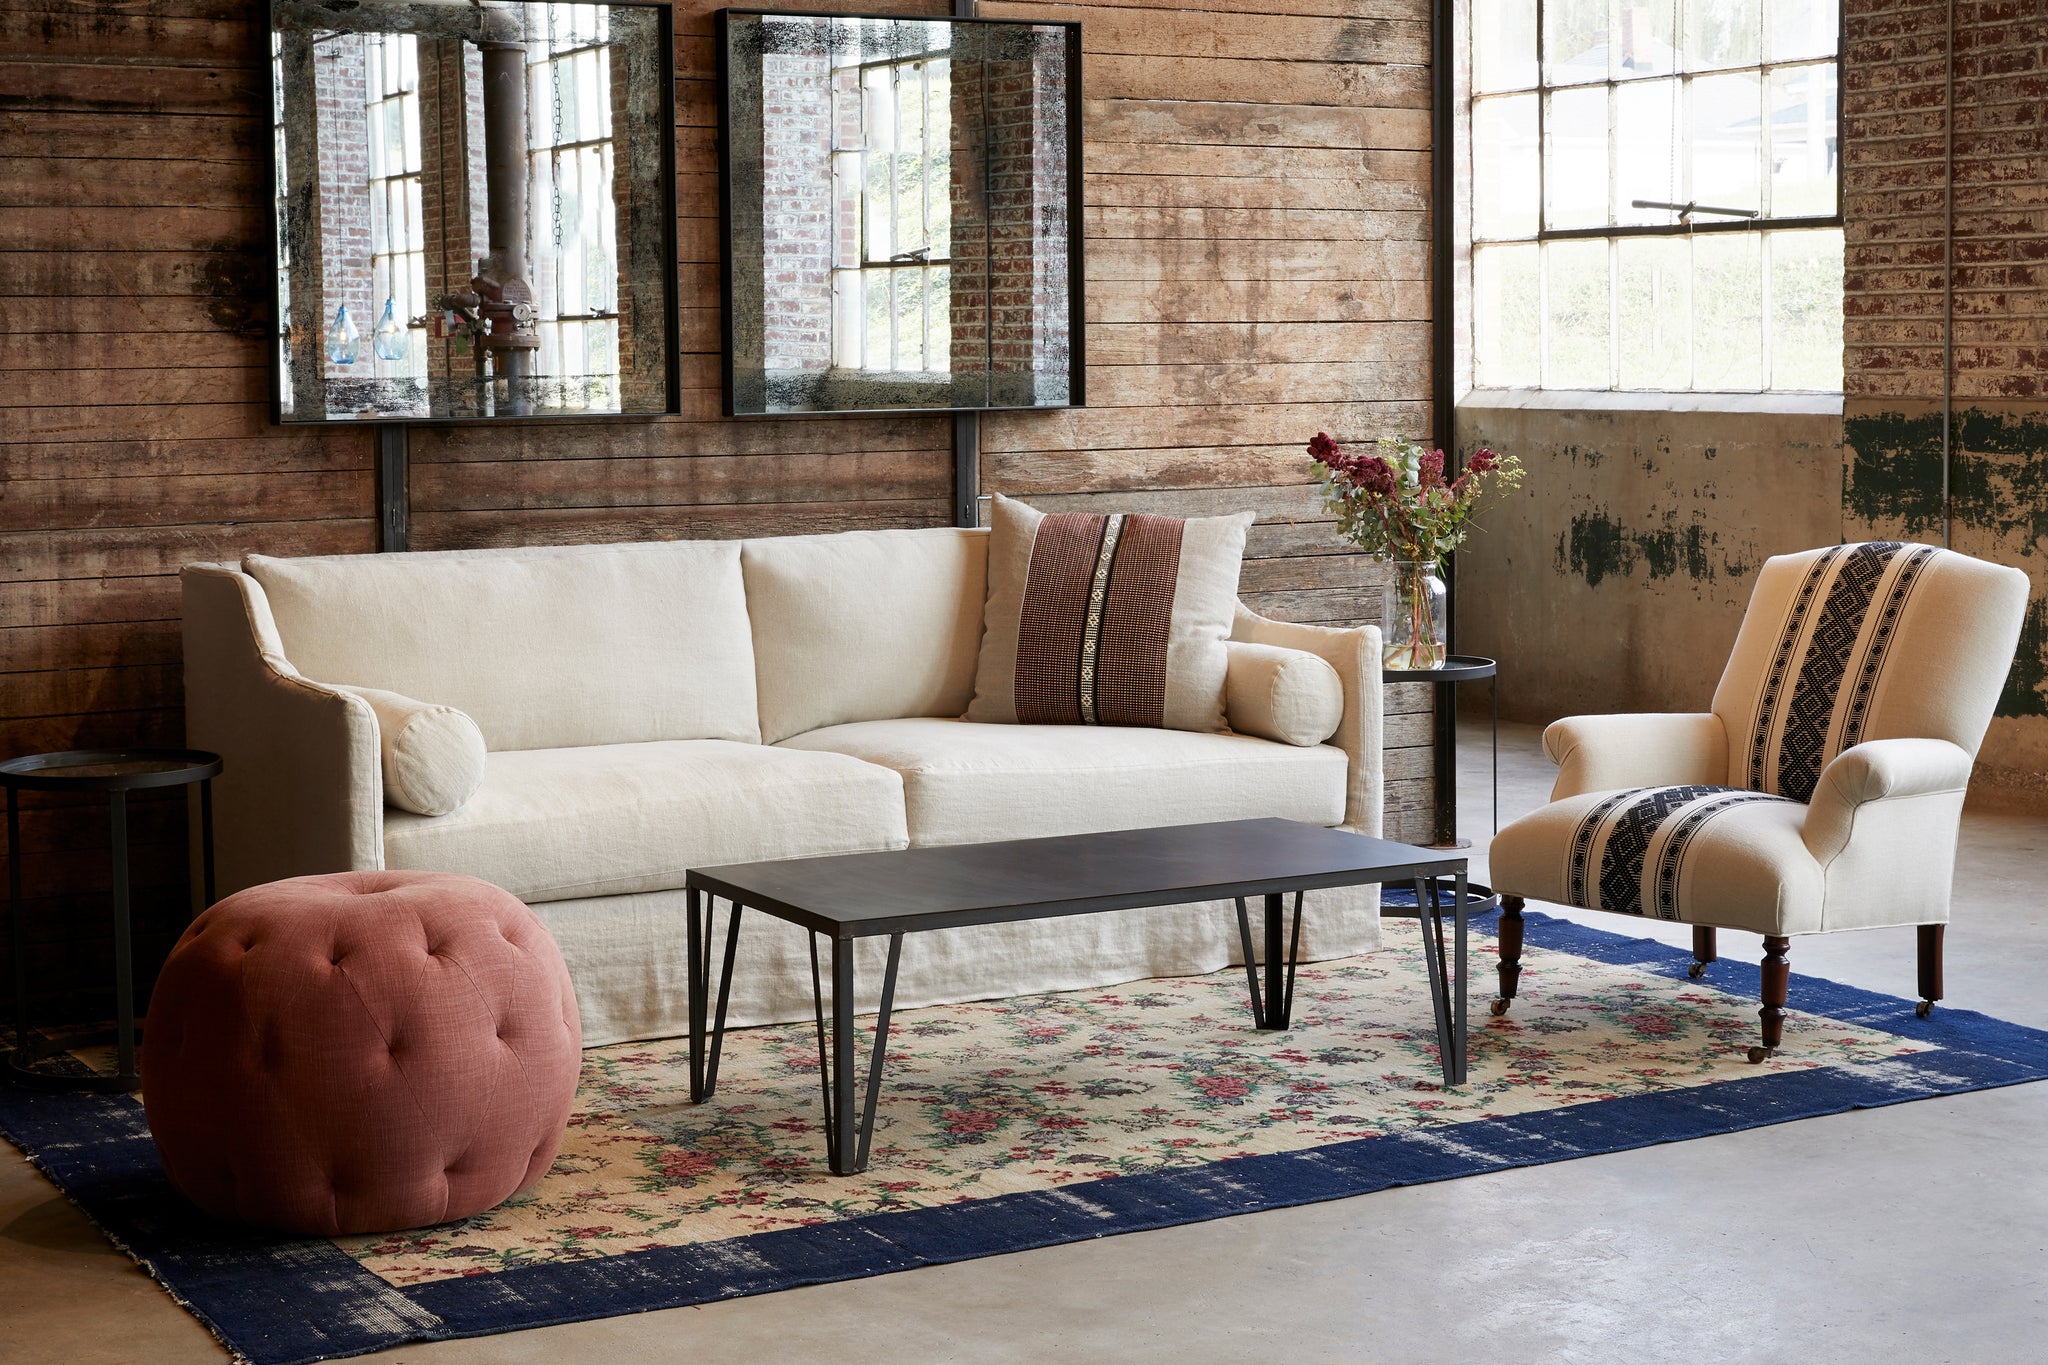  Pouf Ottoman 26 in Rye Terra next to a coffee table, a light sofa, and chair. Photographed in Rye terra. 